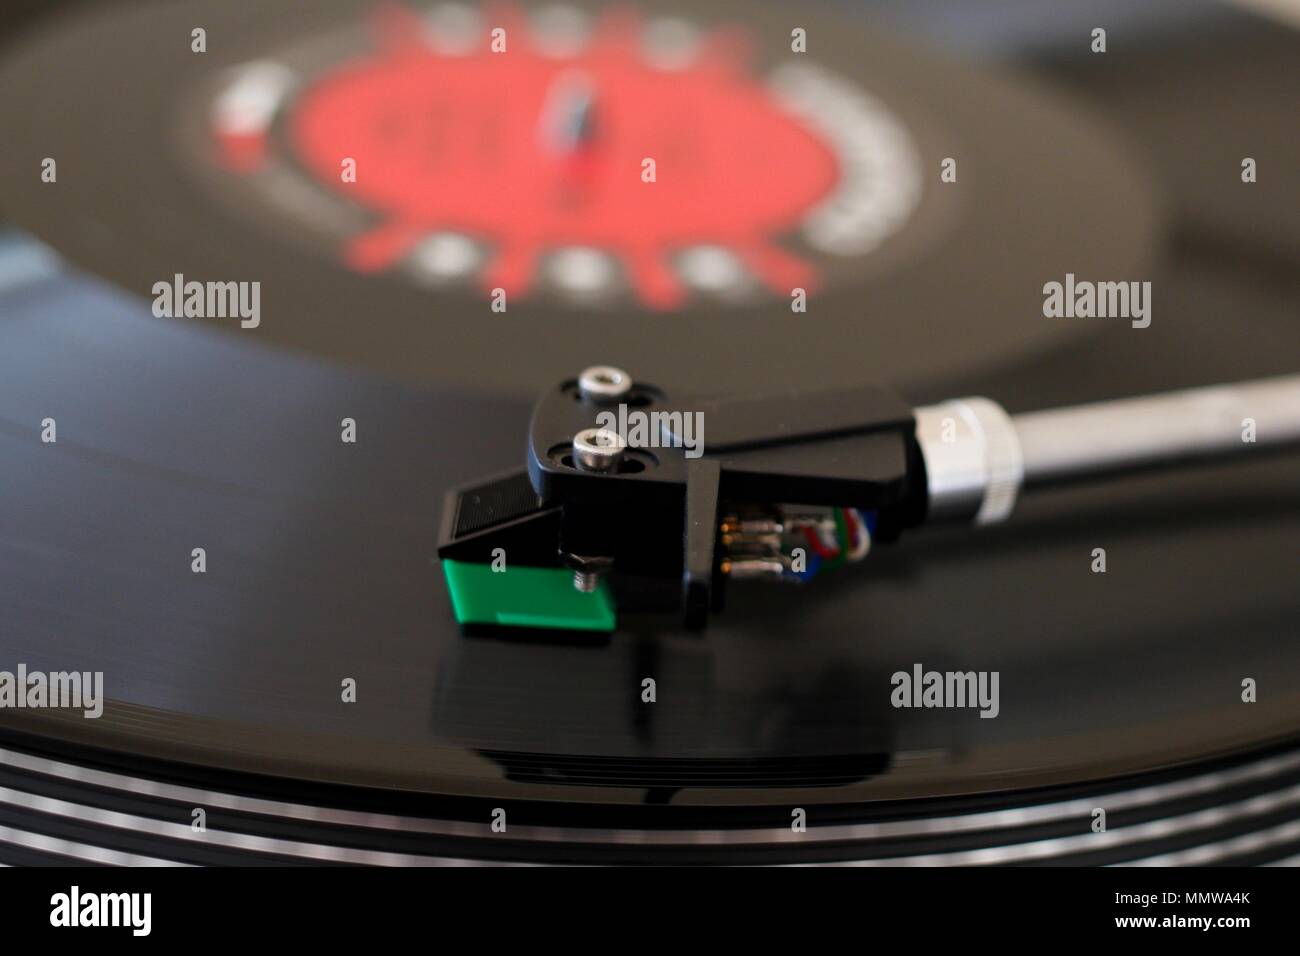 Vinyl record on old Dual 505 turntable Stock Photo